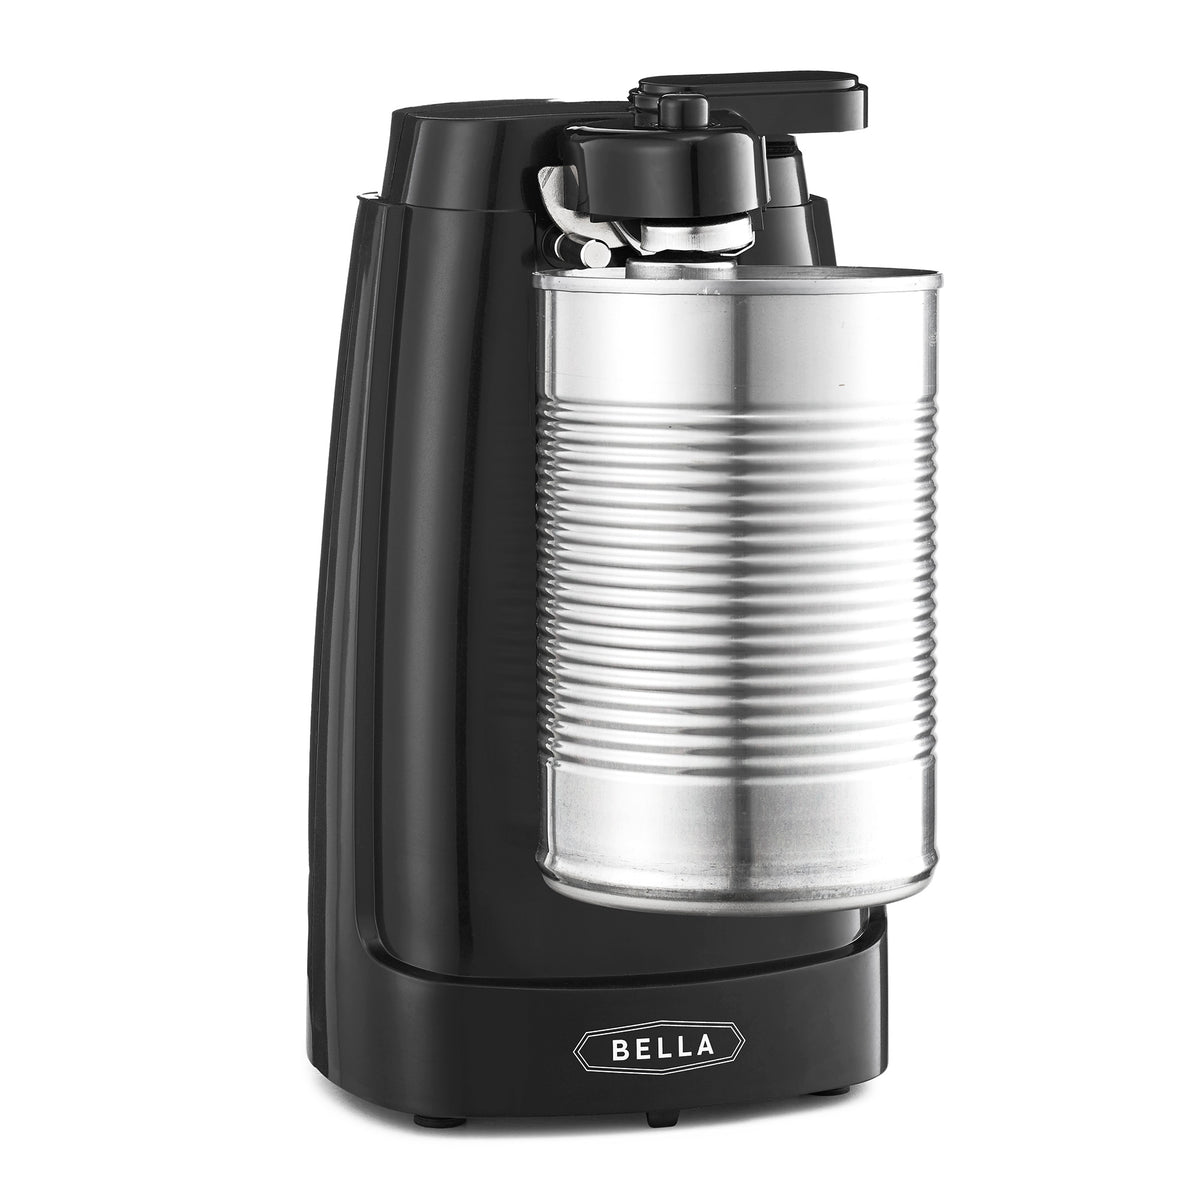 product link in the bios BELLA Electric Can Opener, Automatic Can Open, Electric Utensils